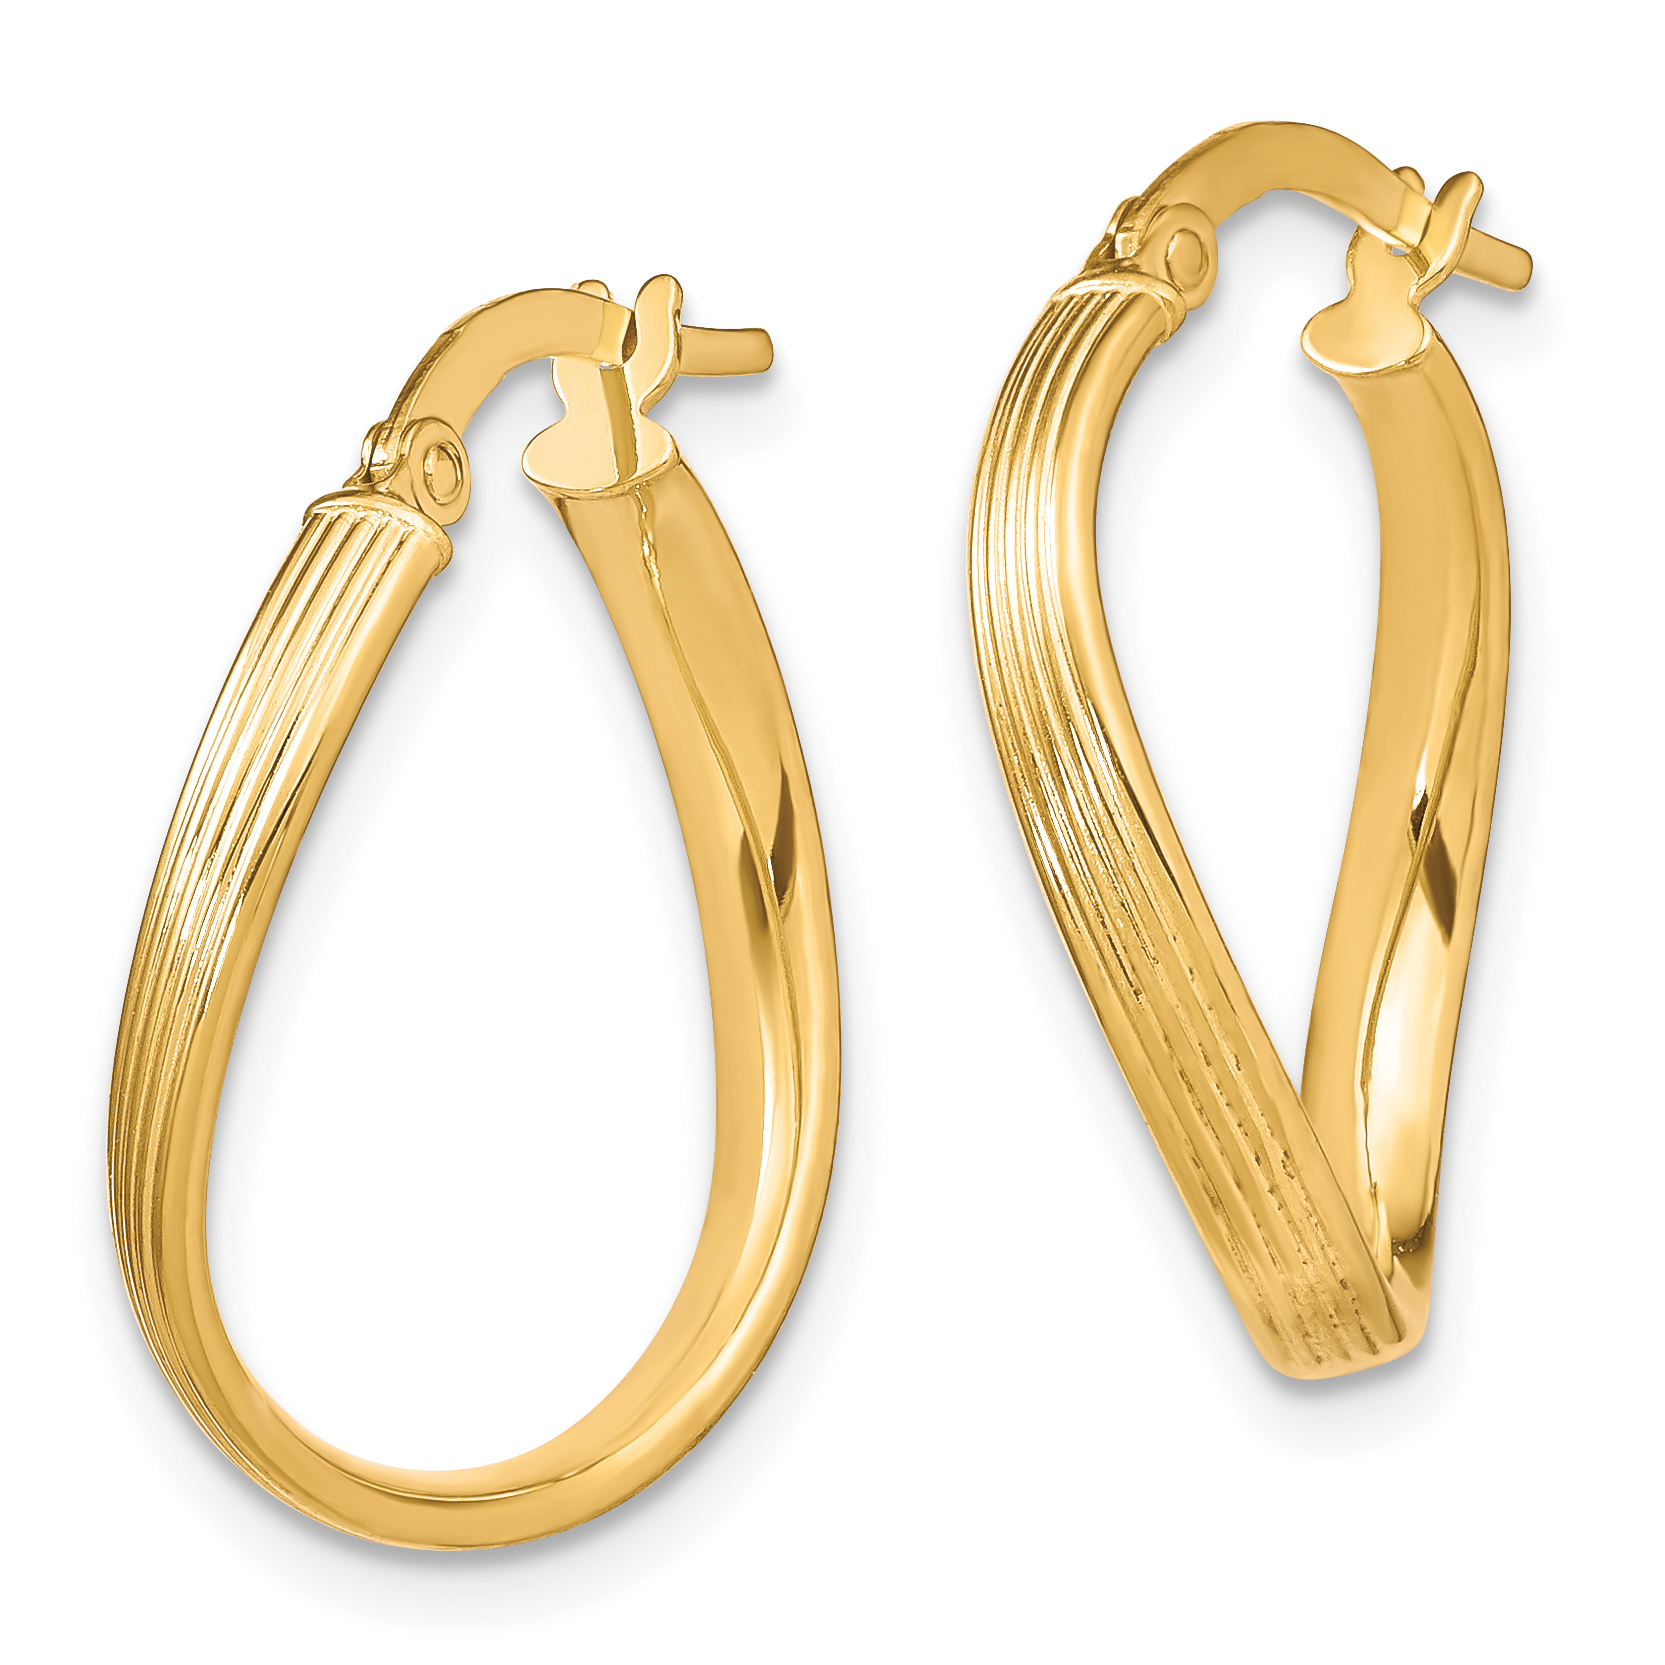 Leslies 10k Yellow Gold Polished Hinged Hoop Earrings 10LE106 for sale ...